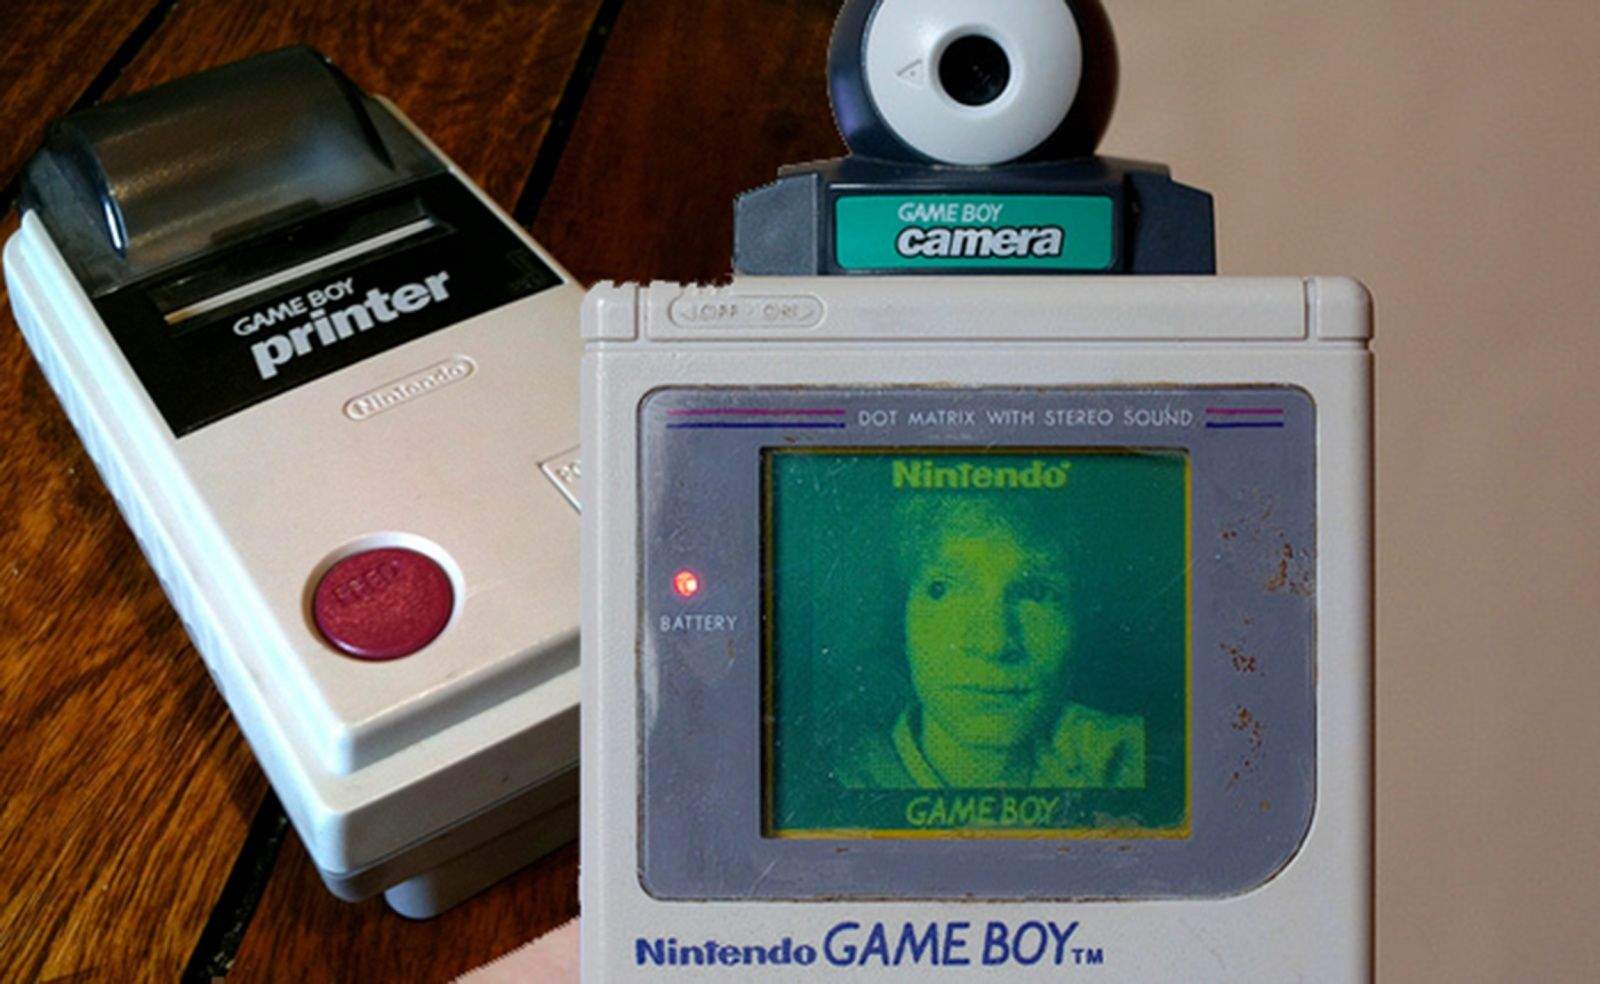 Towards the end of the life of the Game Boy player, Nintendo added a camera attachment. Photo: Solopress